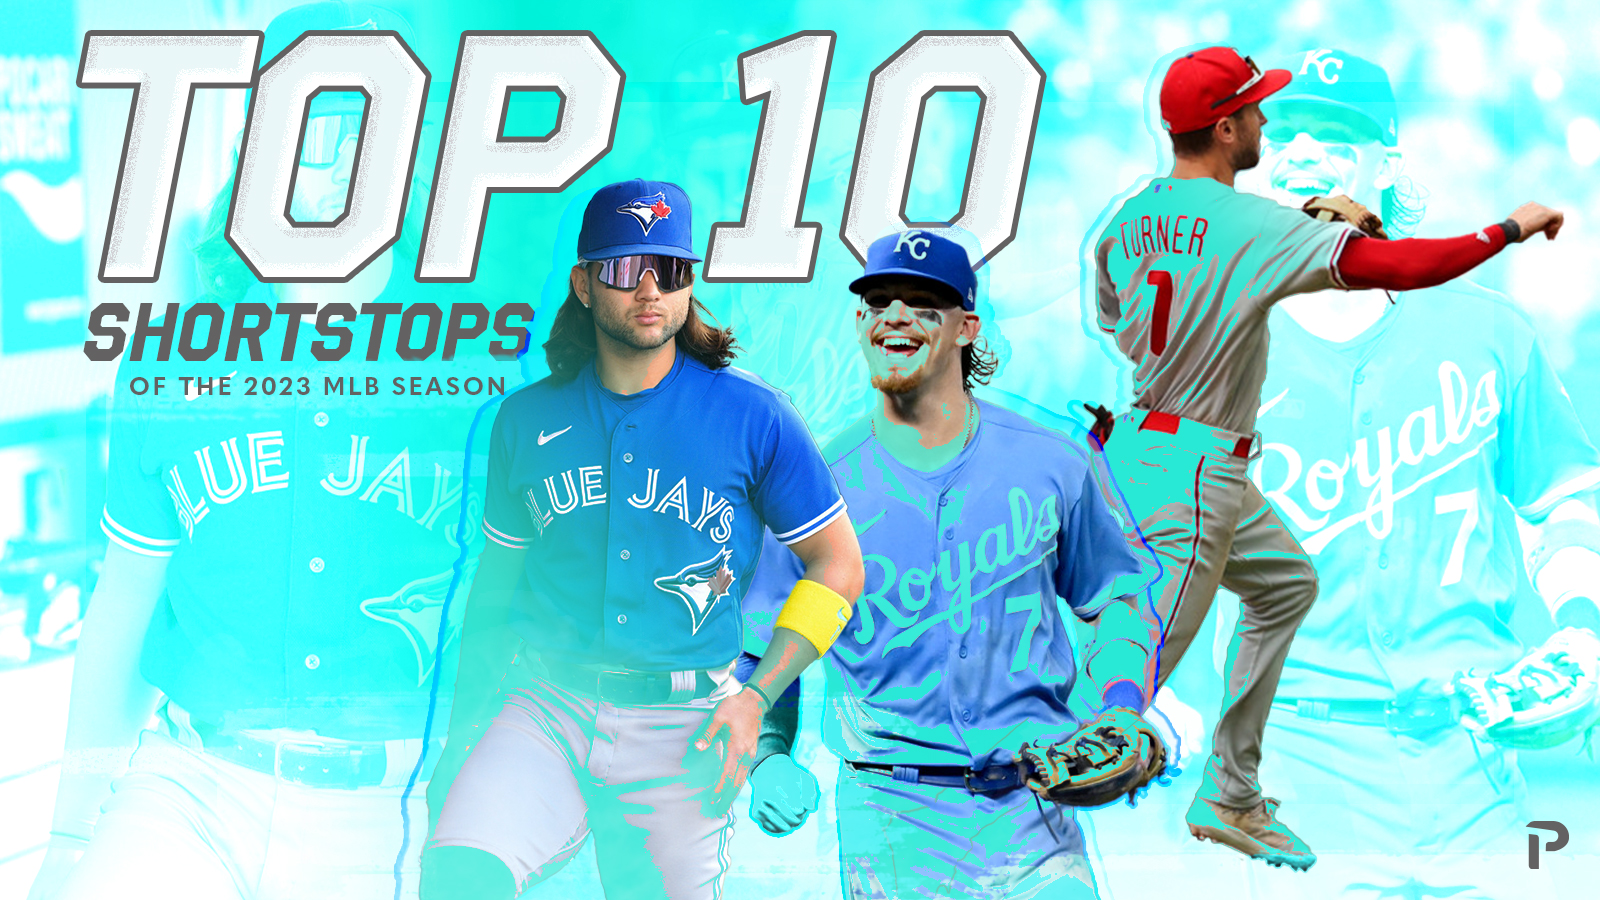 These are the 10 Best-Selling @MLB Jerseys this year. How many of